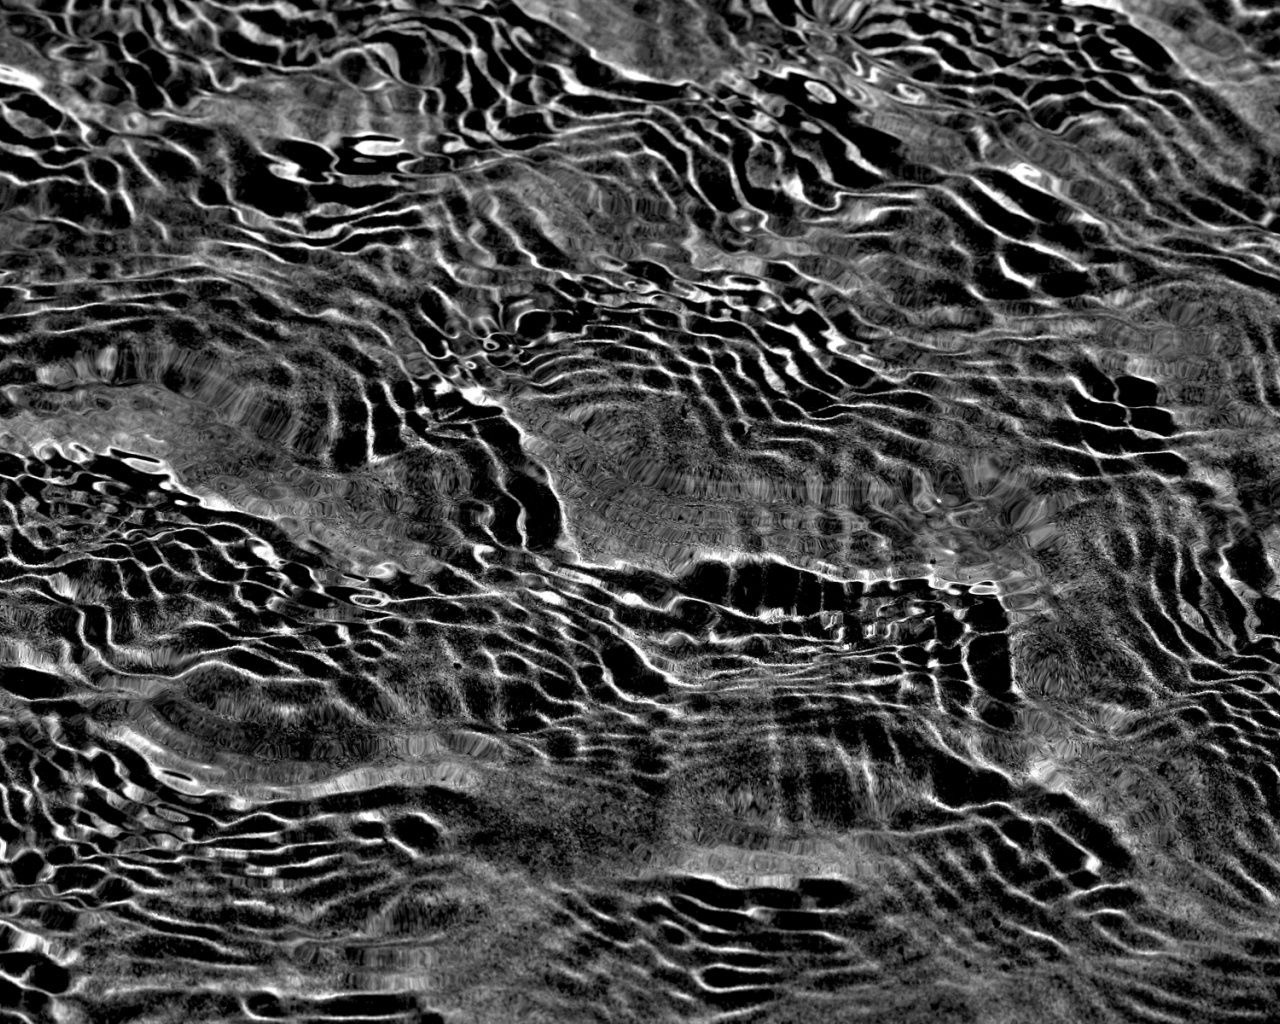 Rippled Water Texture